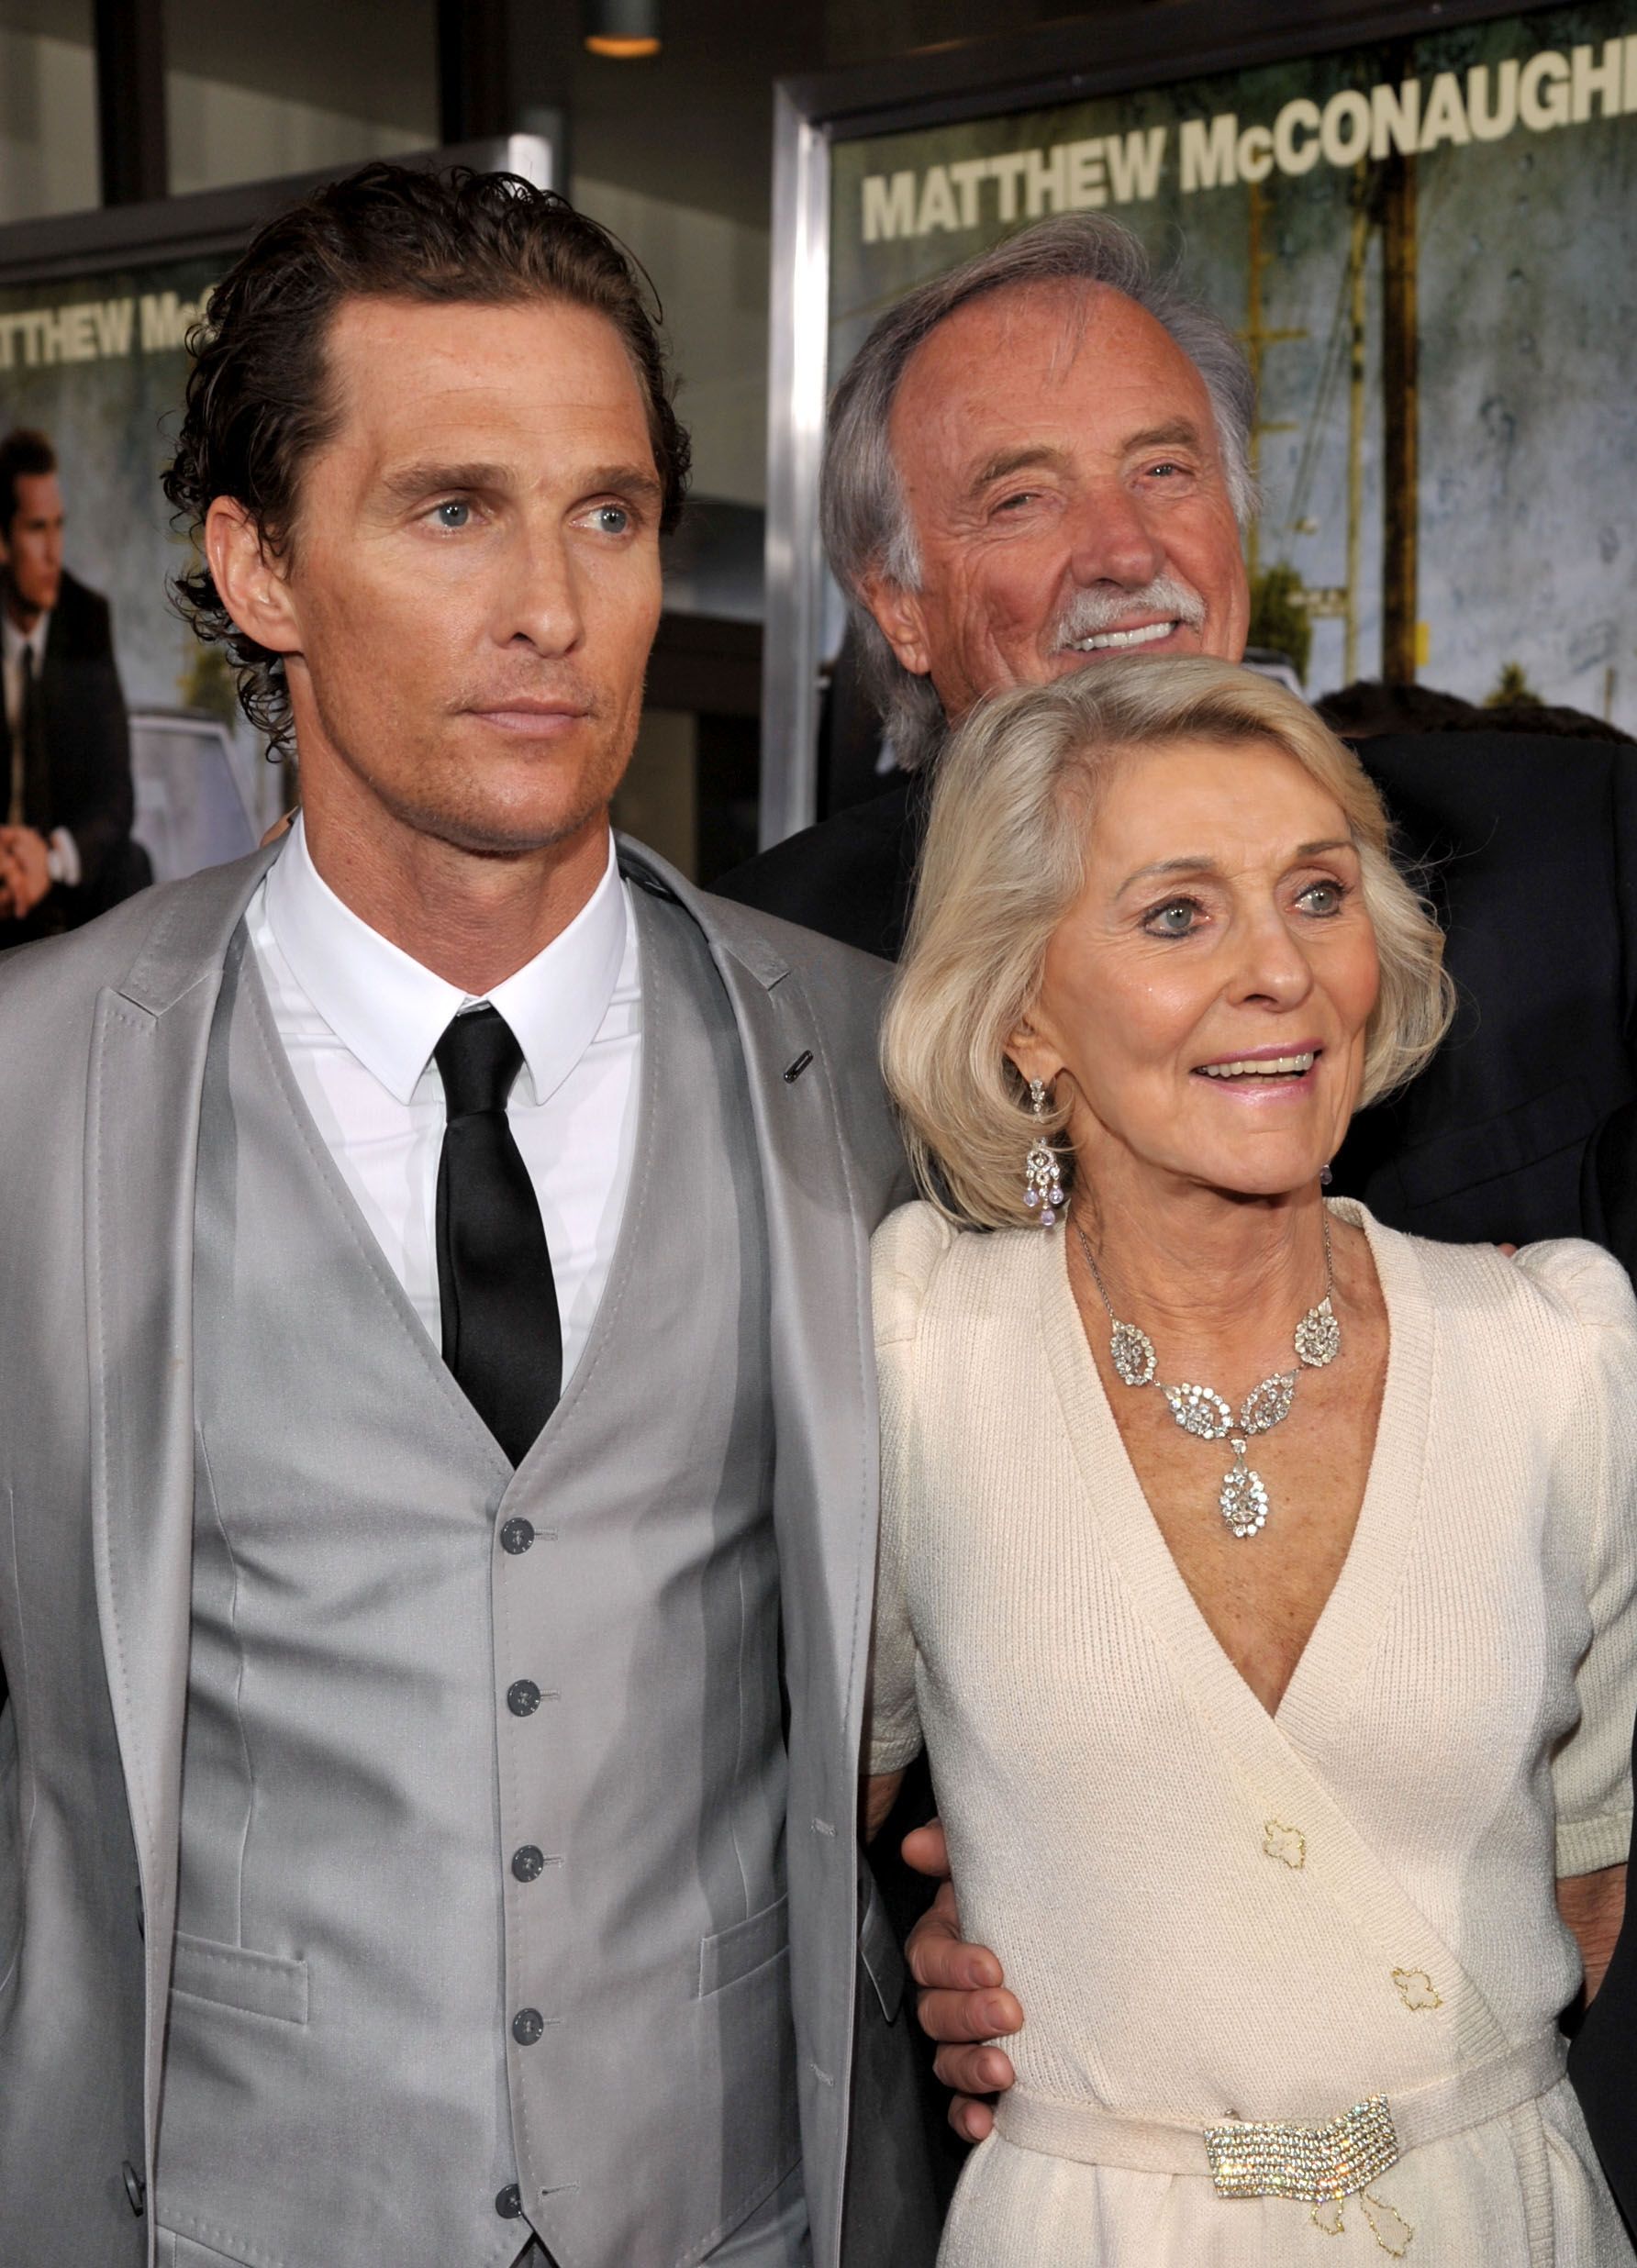 Matthew McConaughey, and parents Mary Kathlene McCabe, and James Donald McConaughey at "The Lincoln Lawyer" Los Angeles screening on March 10, 2011, in Hollywood, California | Photo: Lester Cohen/WireImage/Getty Images